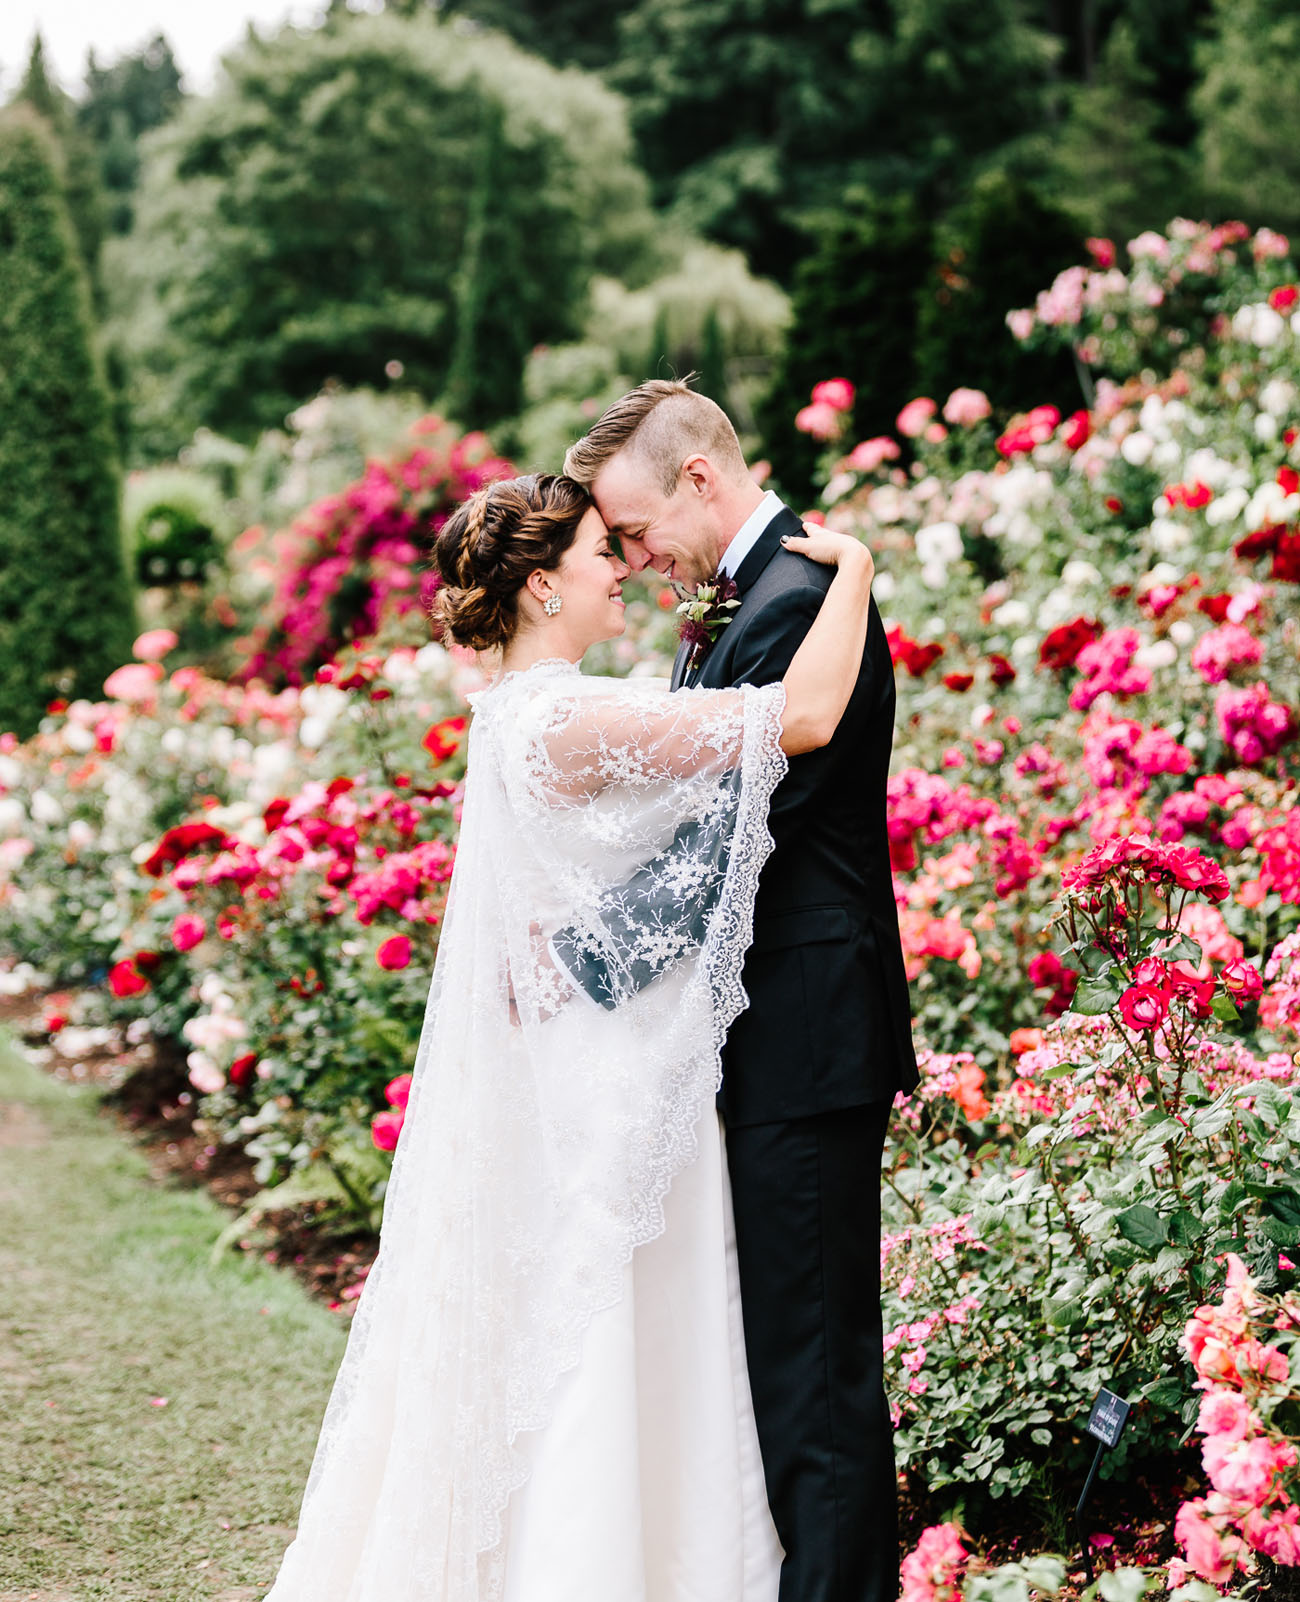 This blooming garden became a perfect place for a romantic wedding